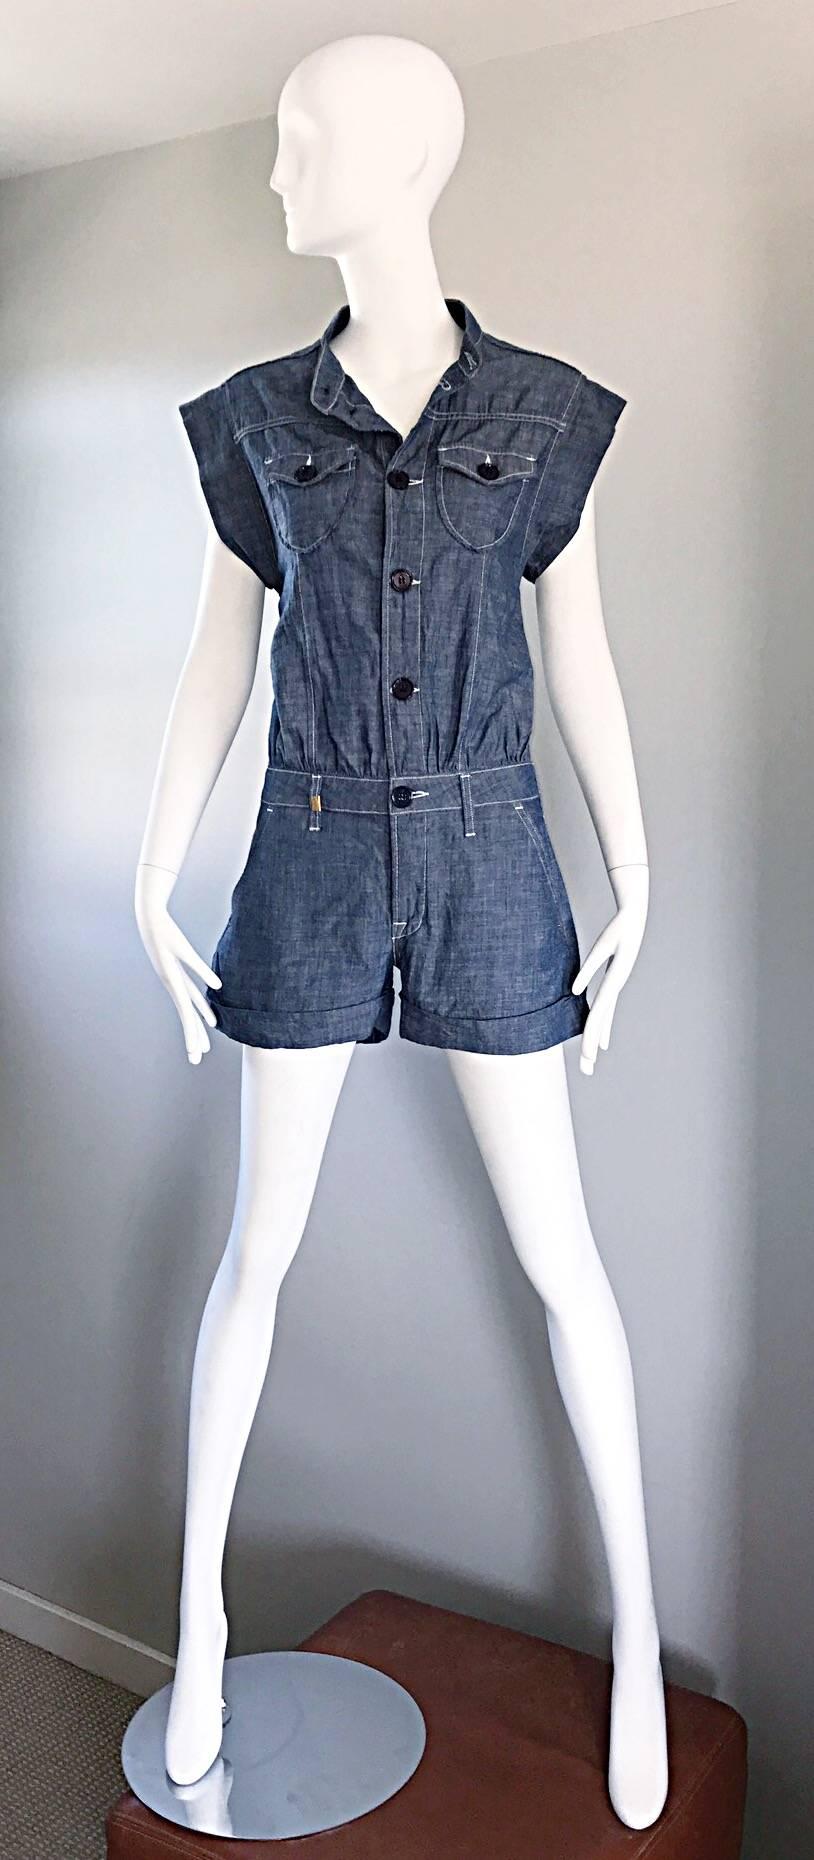 Stylish early 2000s MISSONI blue jean denim one piece romper! Features navy blue buttons up the bodice. Cuffs at each leg opening. Super soft cotton denim. Belt loops around the lower waist--looks great alone or belted. Pockets at each side of the